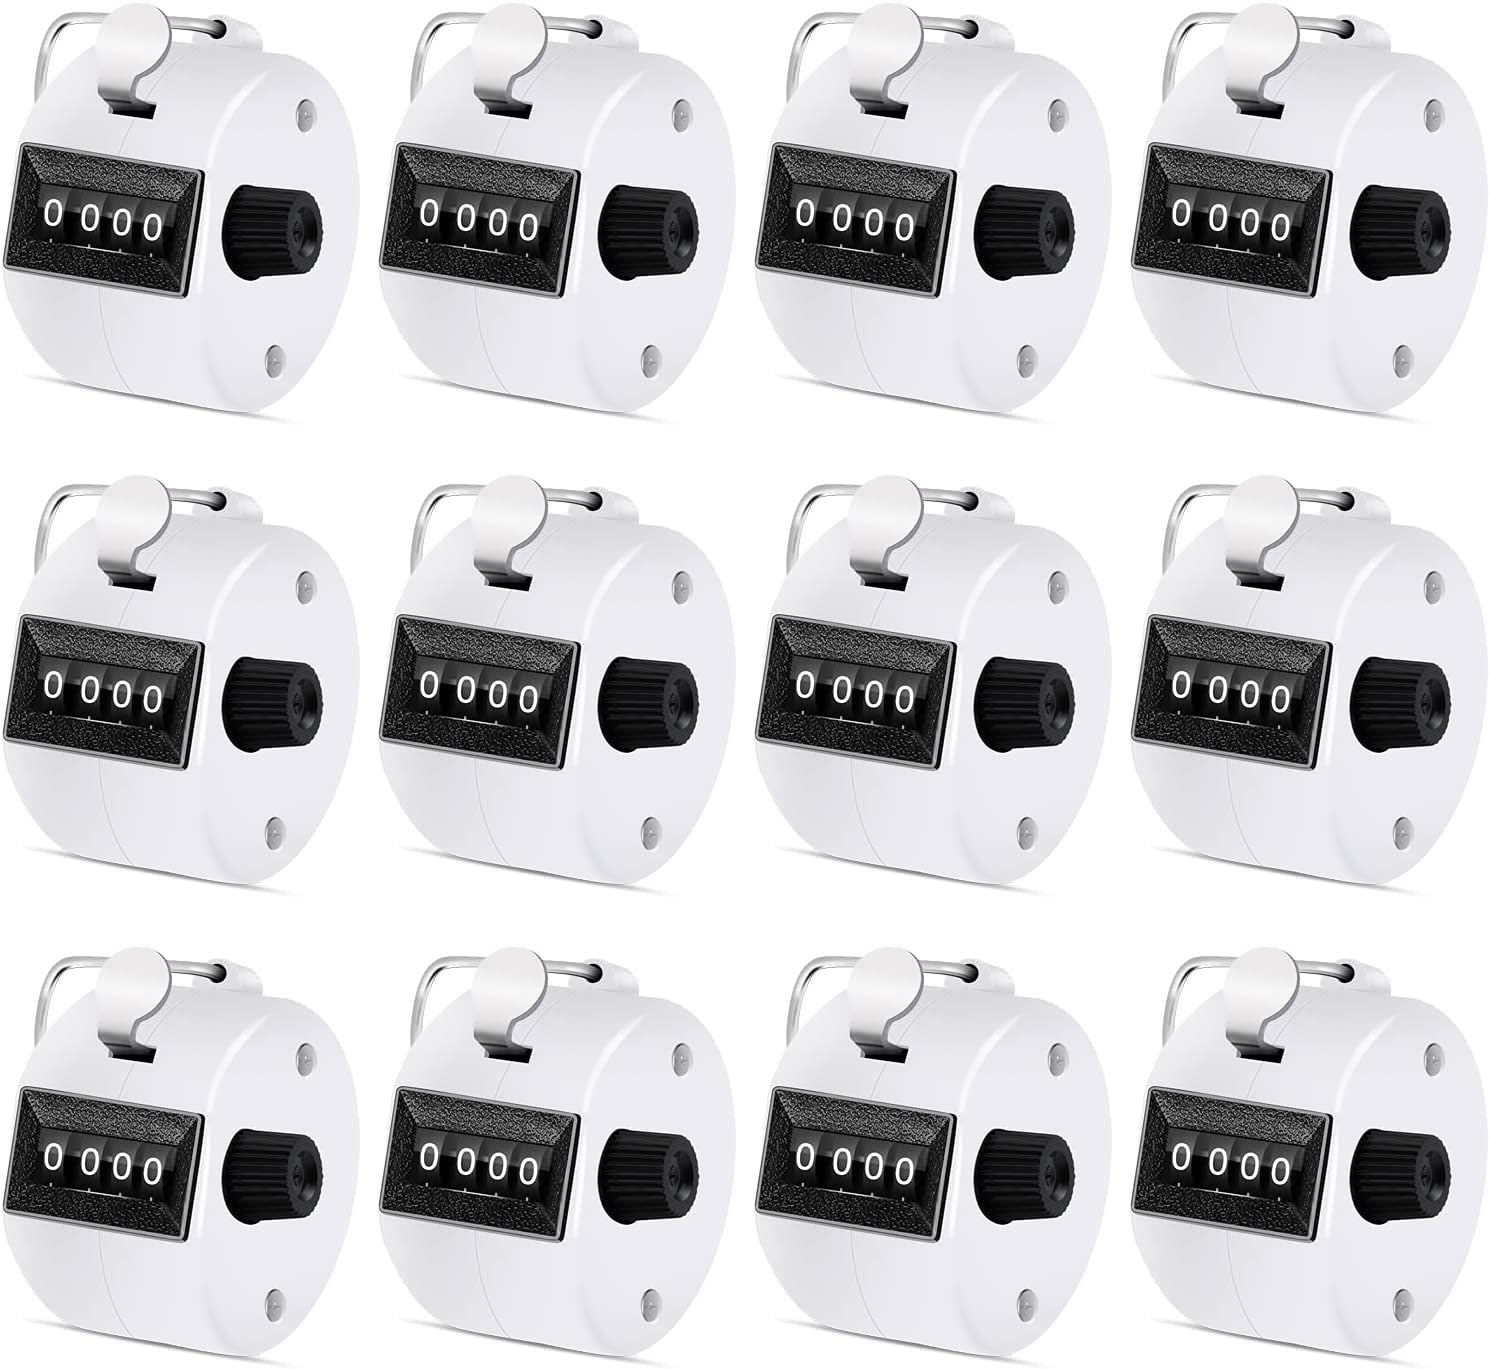  12 Pcs Hand Tally Counter 4-Digit Lap Counter Clicker, Manual  Mechanical Handheld Pitch Click Counter with Finger Ring for School Golf &  Knitting Row Croche, Black : Sports & Outdoors